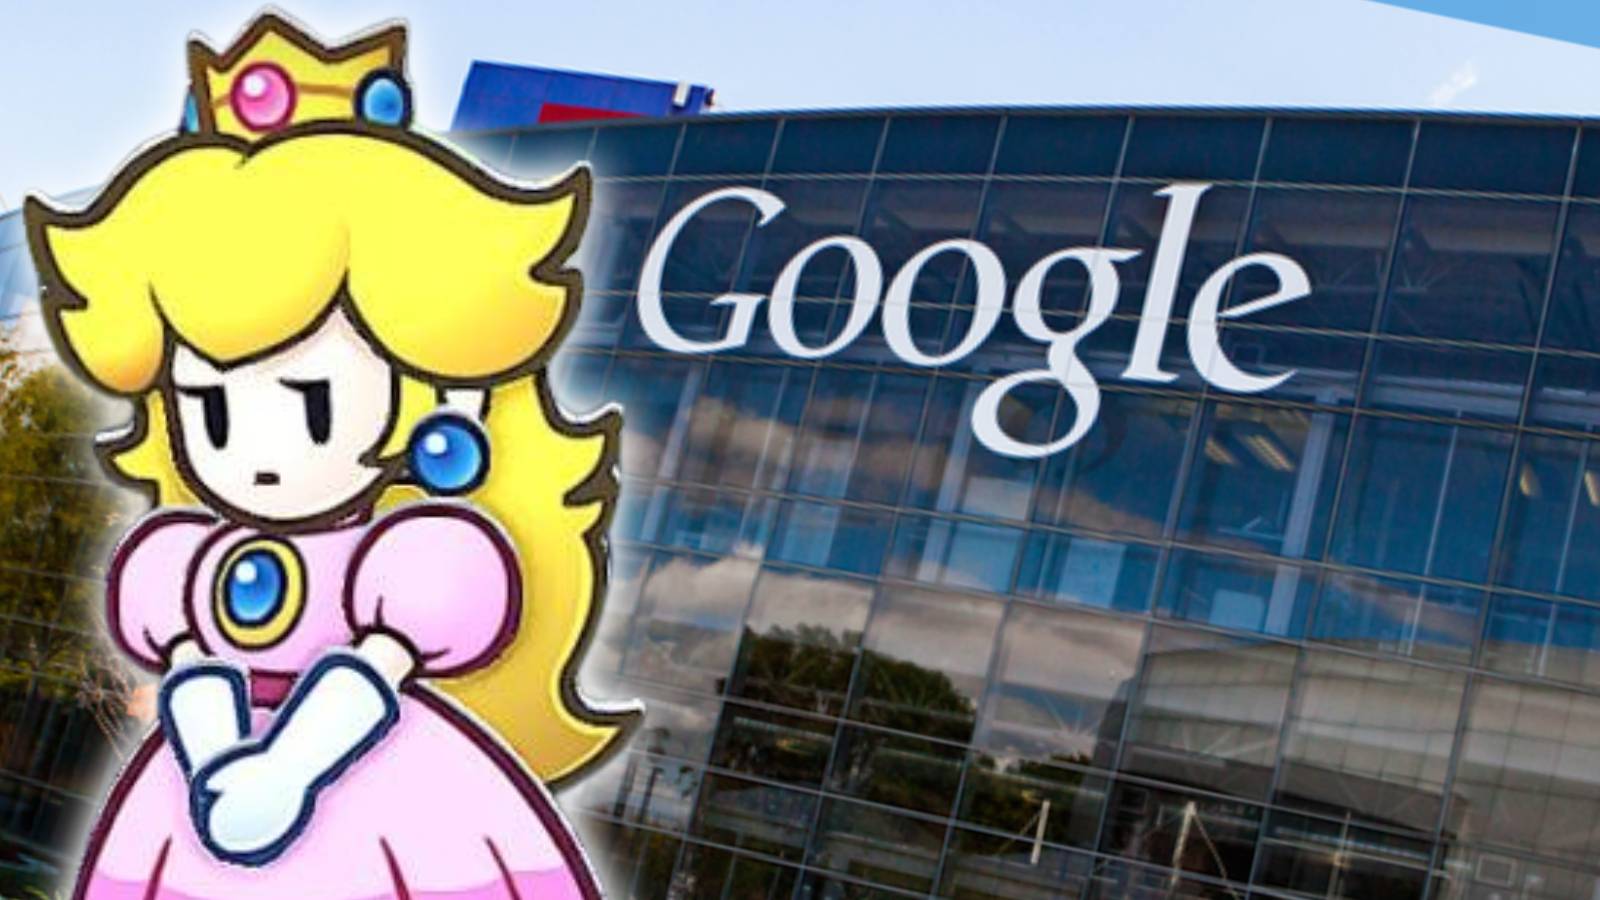 Image of Princess Peach from Paper Mario: The Thousand-Year Door looking at the Google HQ.